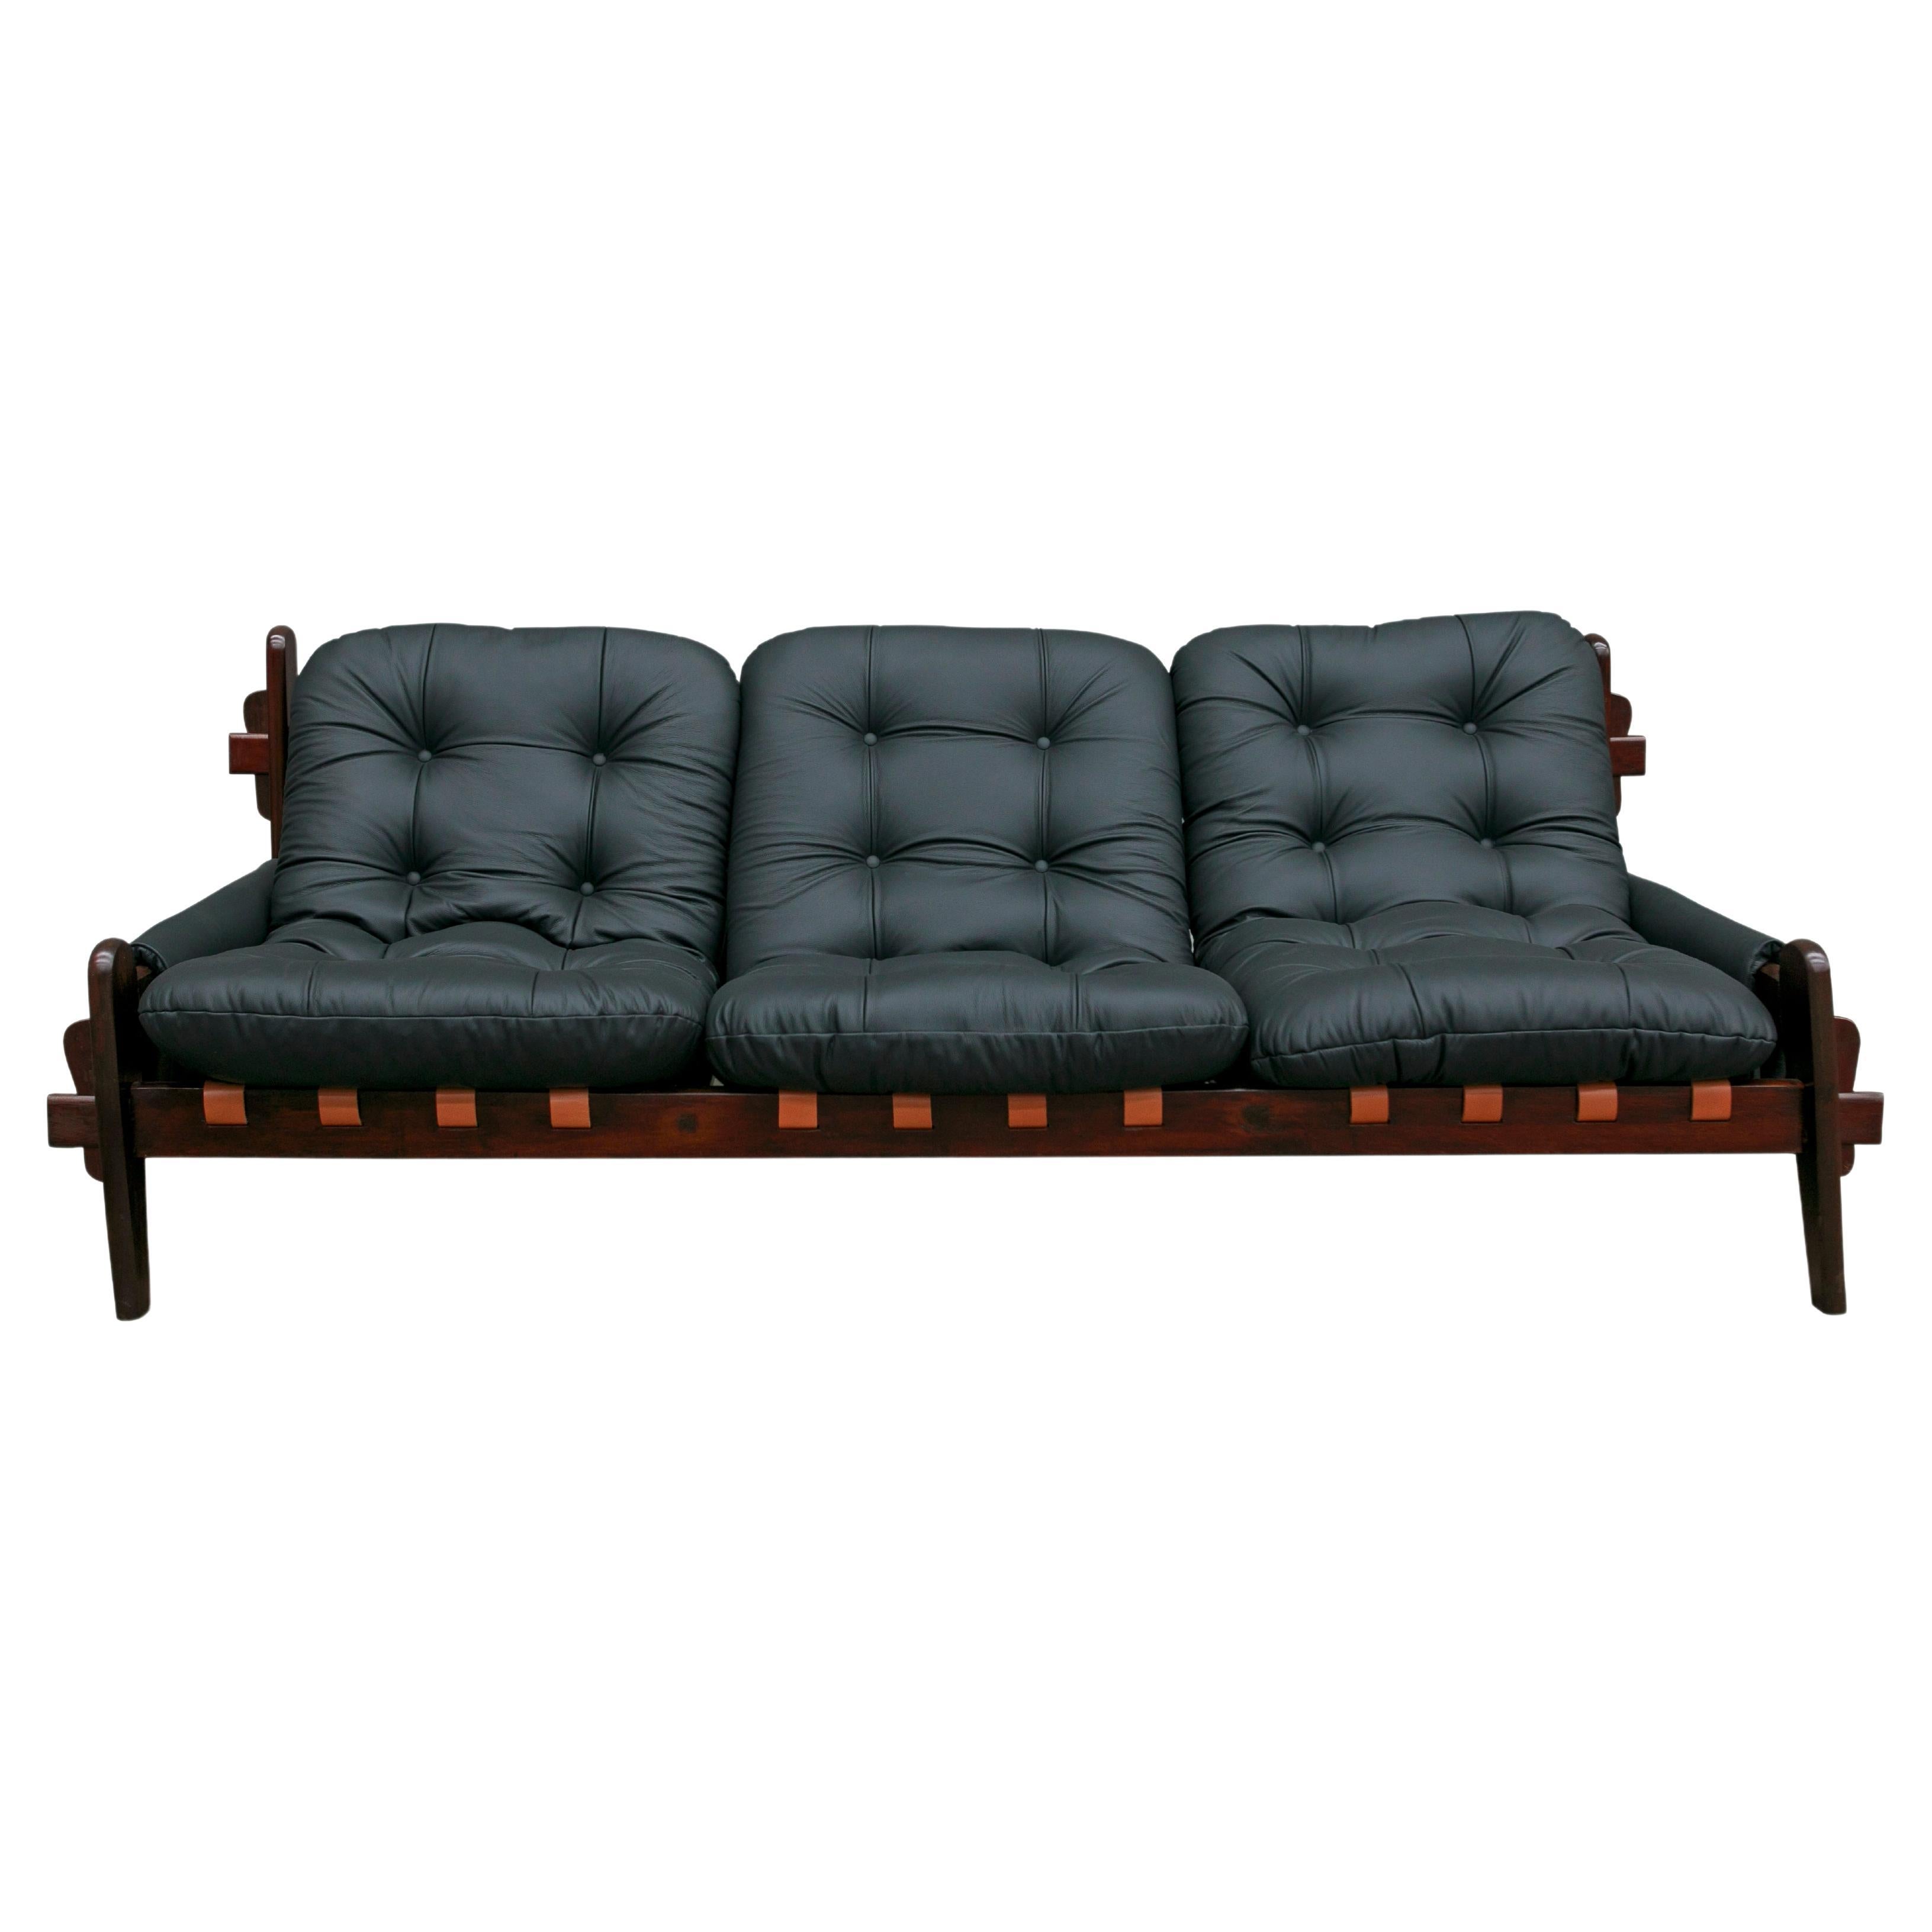 Available now, this very Brazilian modern sofa in black leather and hardwood designed by Jean Gillon in the seventies is simply spectacular!

This gorgeous, one-of-a-kind three seat sofa features a solid Brazilian Rosewood (known as Jacaranda)